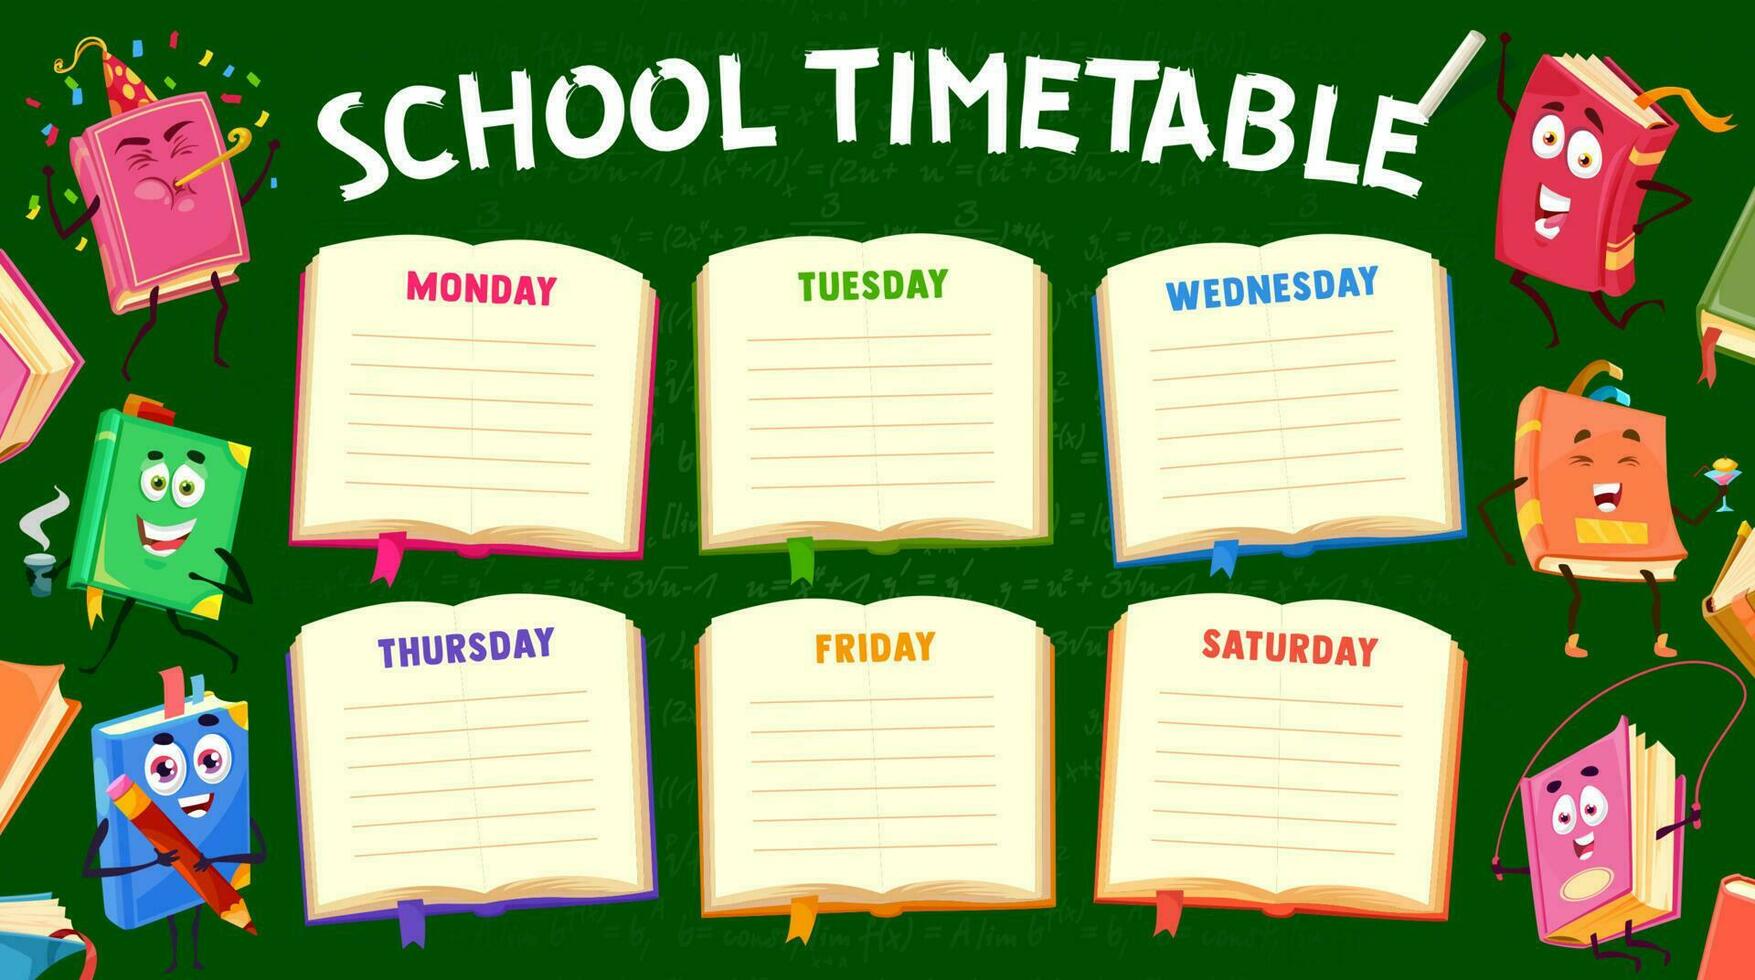 Cartoon books characters on timetable schedule vector